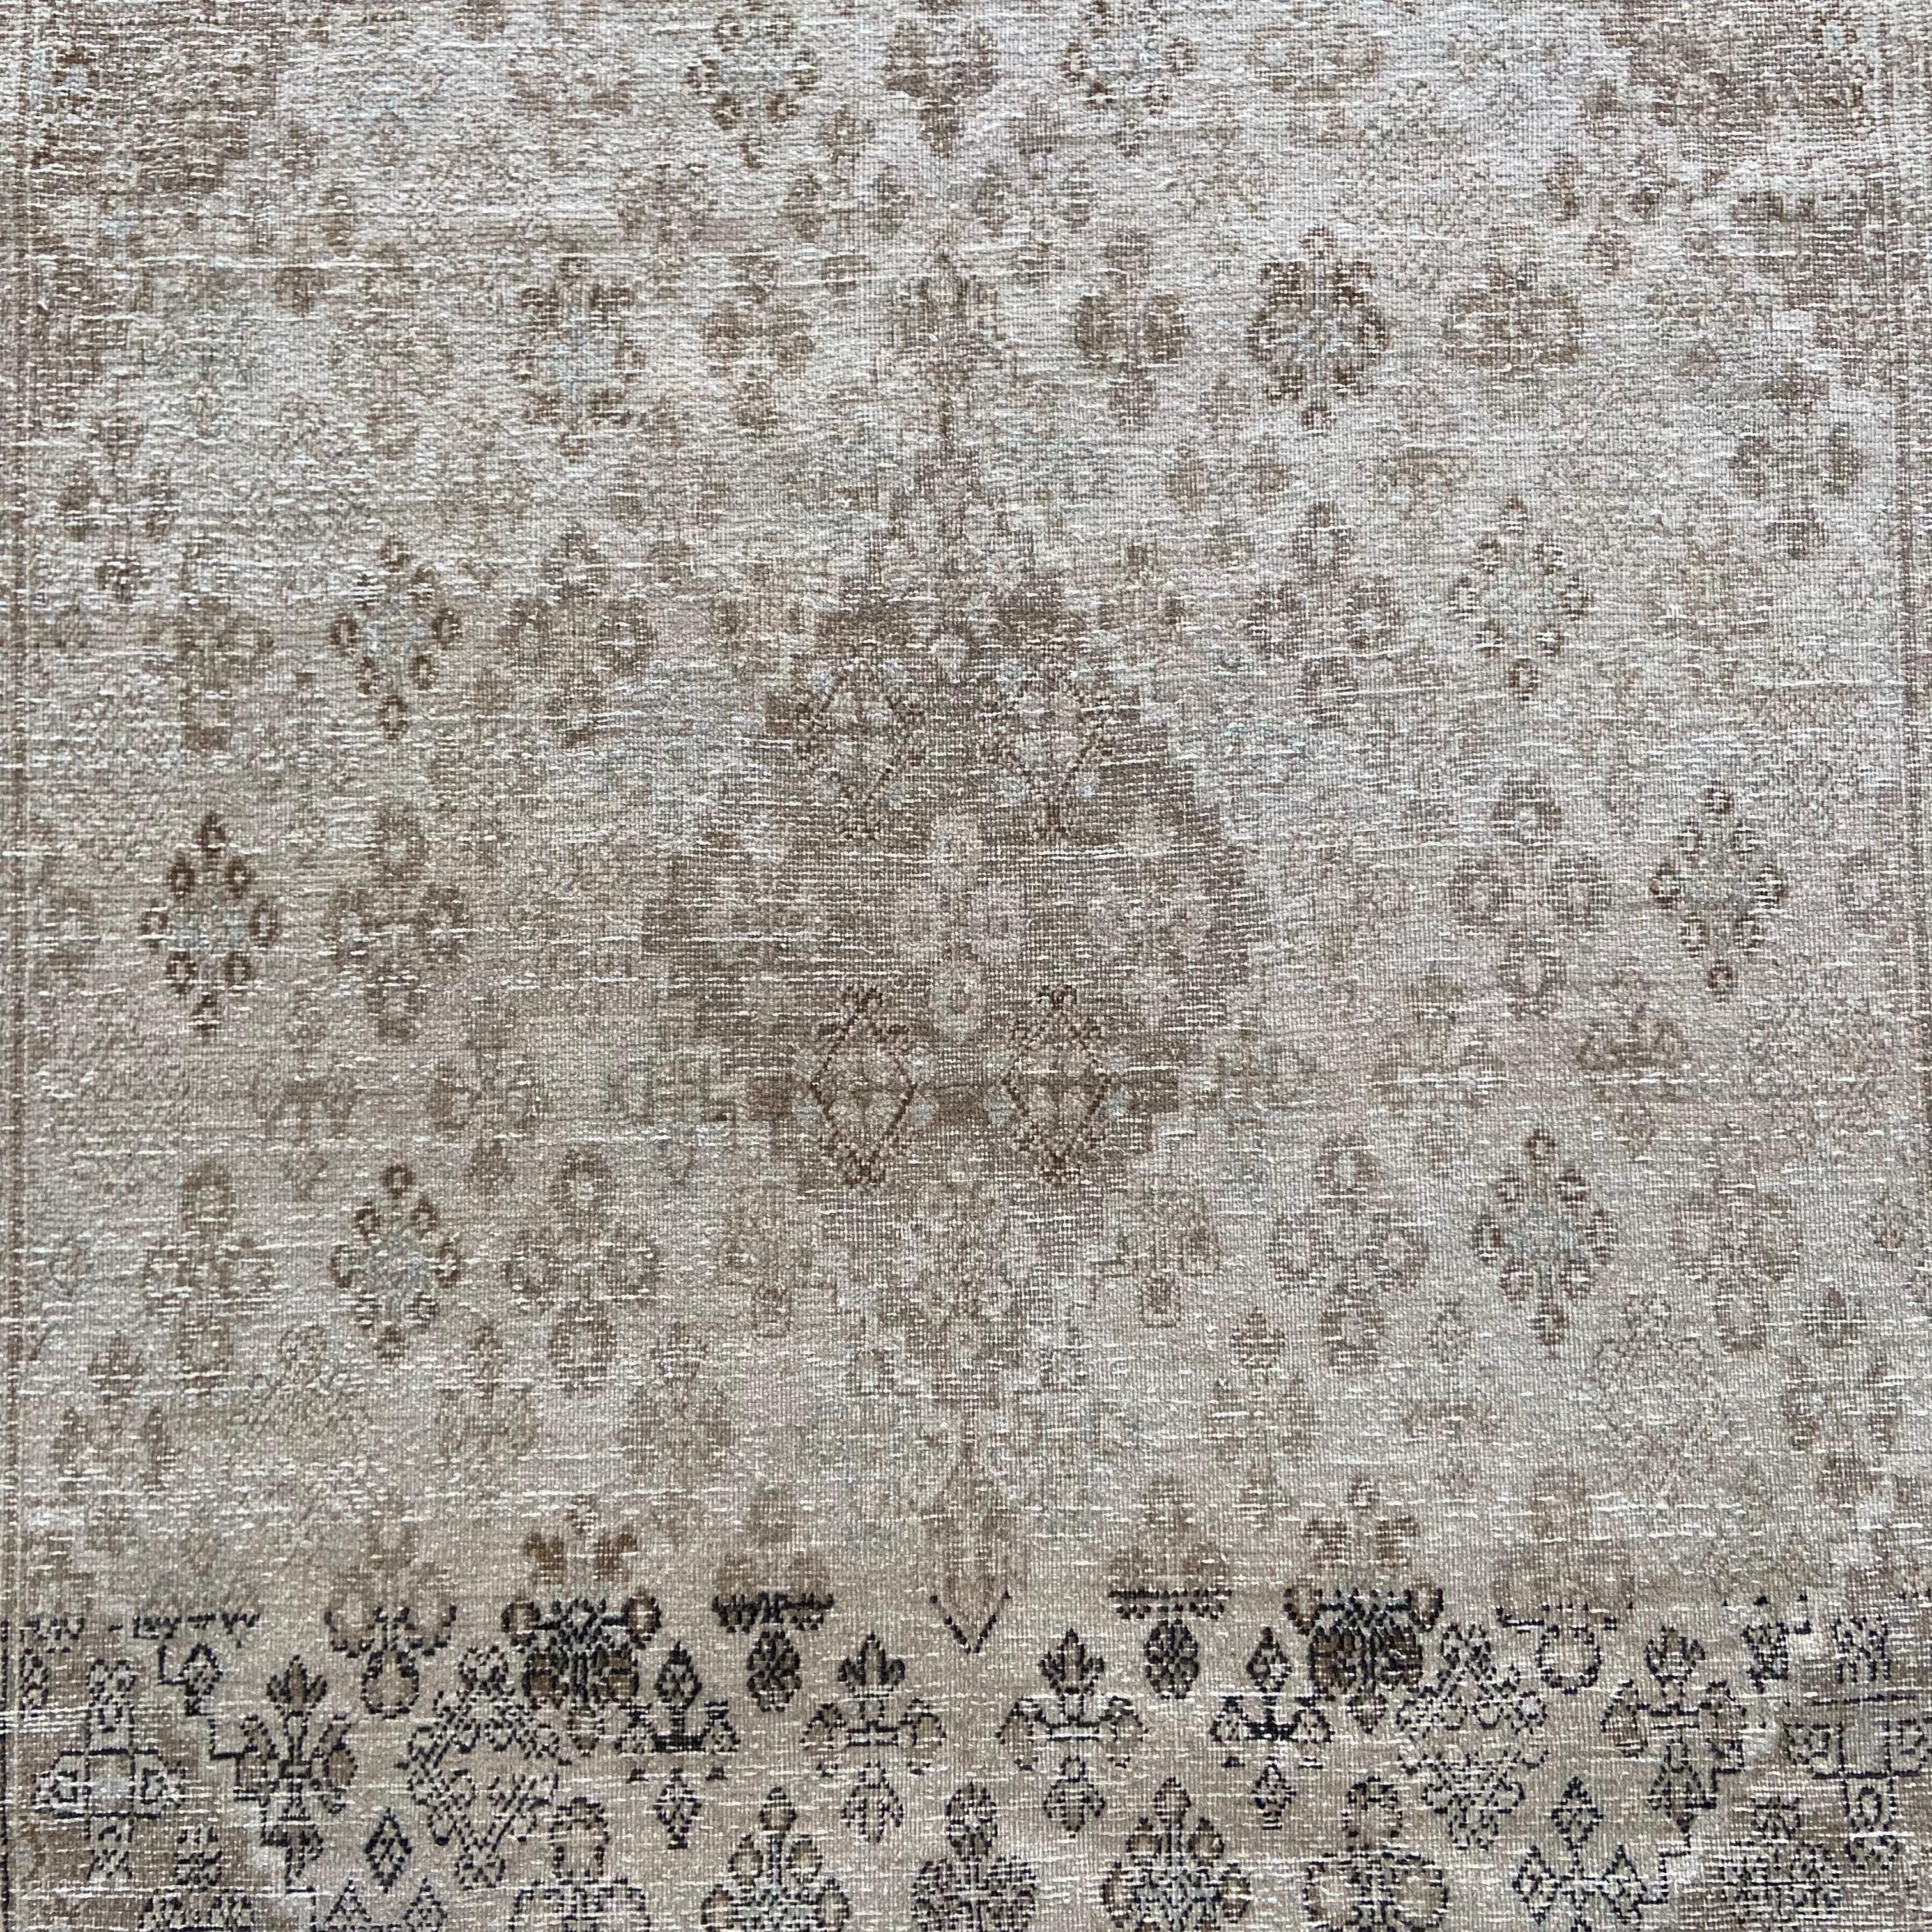 Vintage rug 85” x 124”
The warm colors as well as intricate patterns not only adds character but also makes it truly one-of-a-kind. Some pattern and color variation with vintage items is normal. Beautiful rug has a deep oiled look with colors